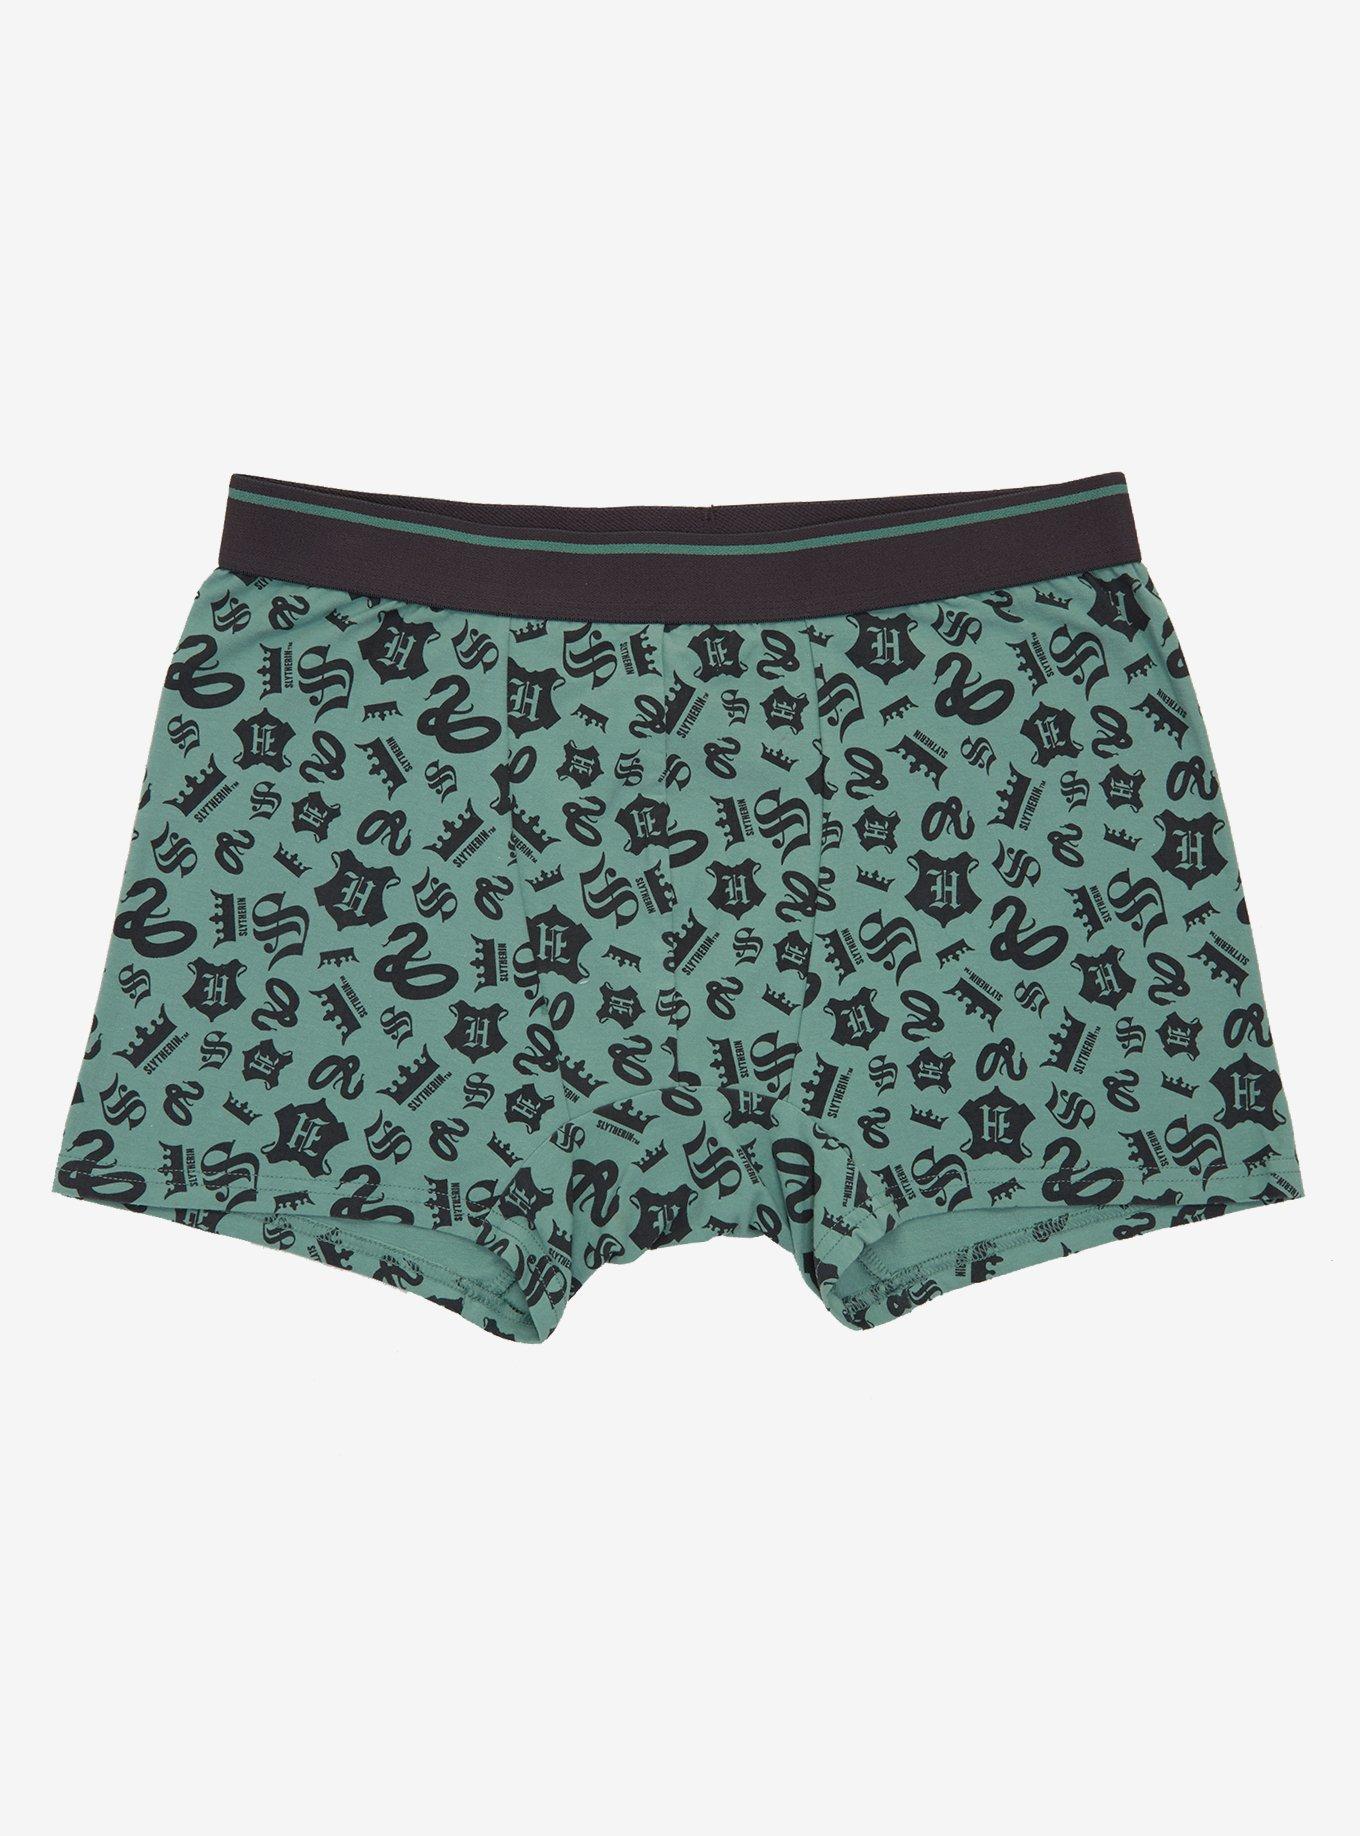 Harry Potter Slytherin Boxer Briefs | Hot Topic